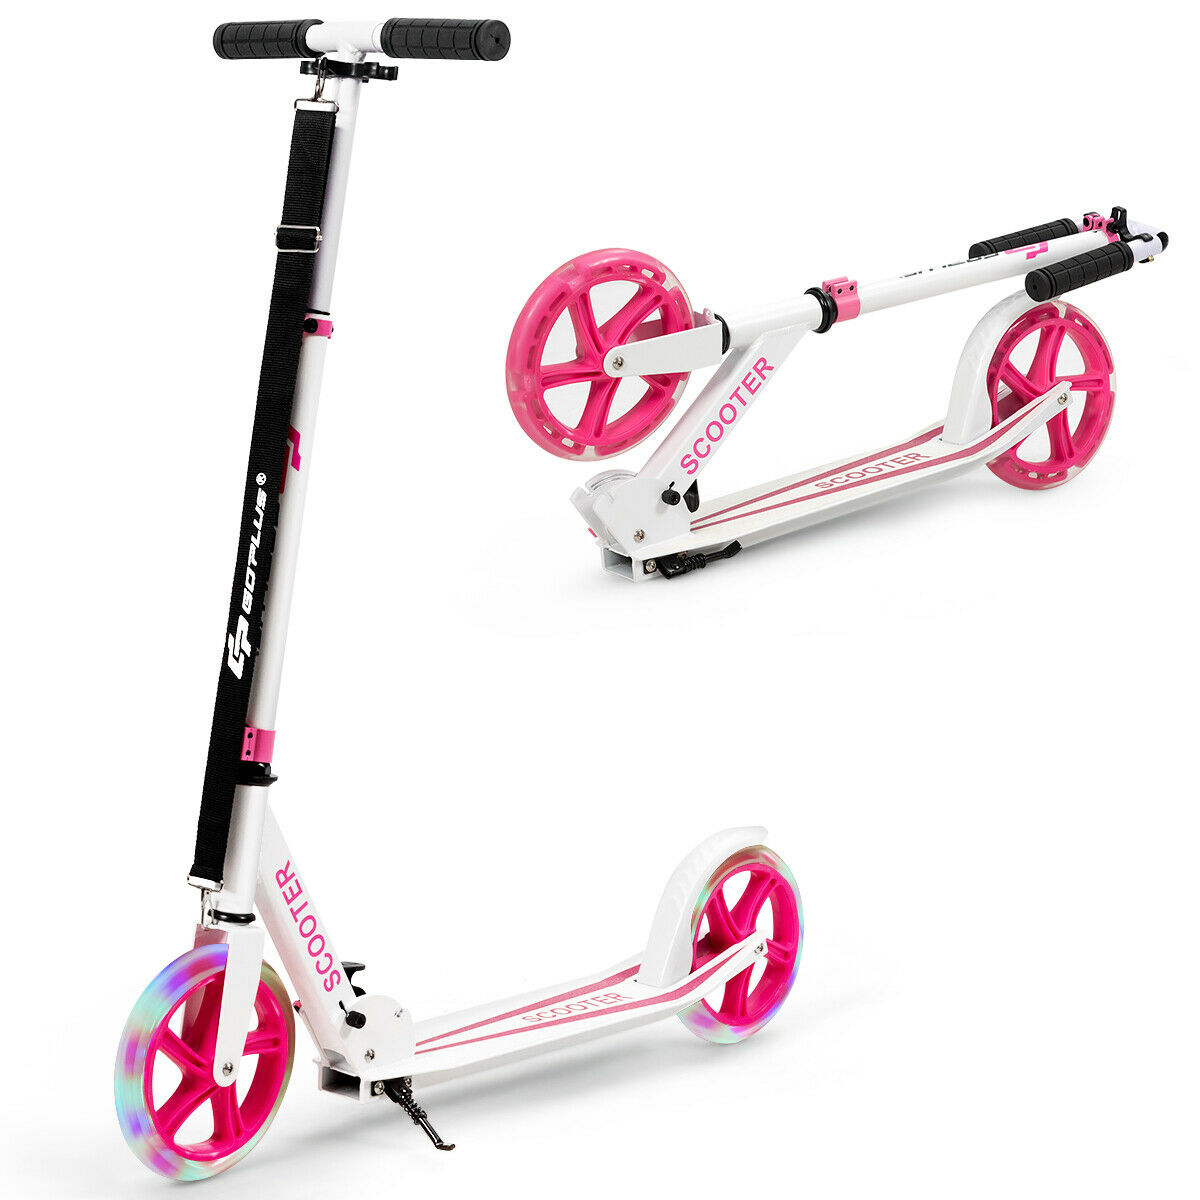 Foldable and Adjustable Kick Scooter with 2 Big Wheels and LED Lights-Pink